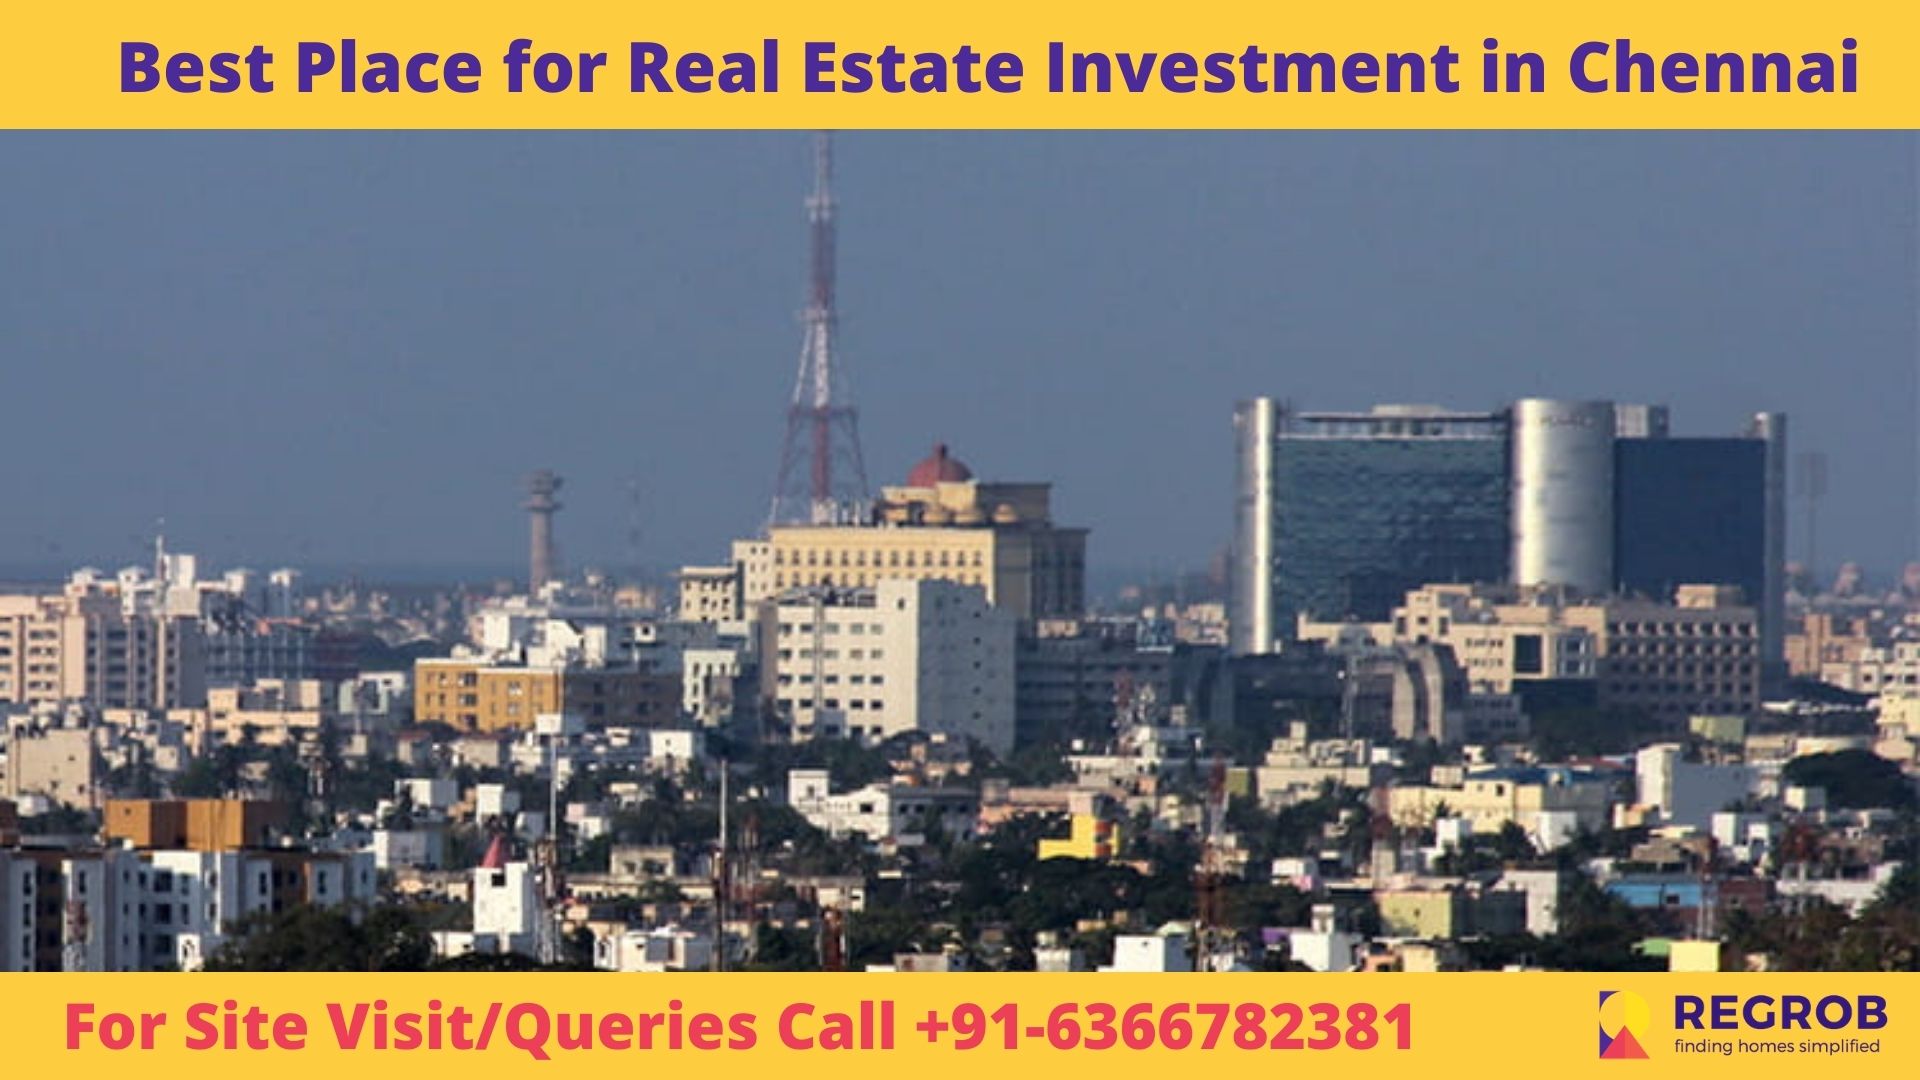 Best Place for Real Estate Investment in Chennai | Fast Developing Areas